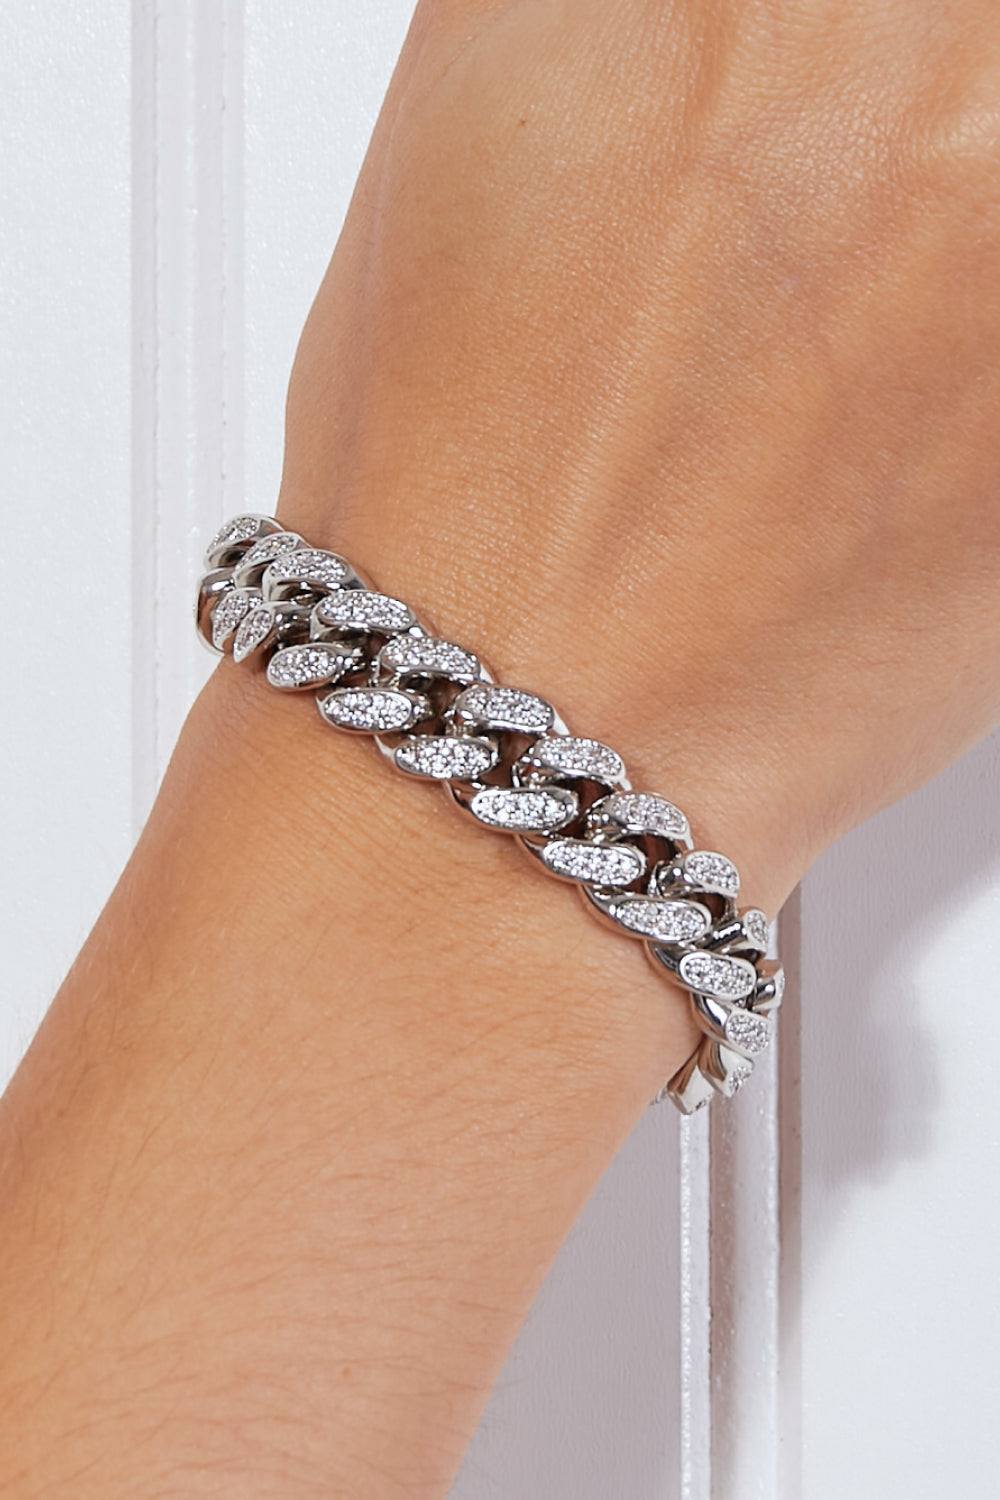 GNJ MANUFACTURING Curb Chain Bracelet in Silver - Ryzela